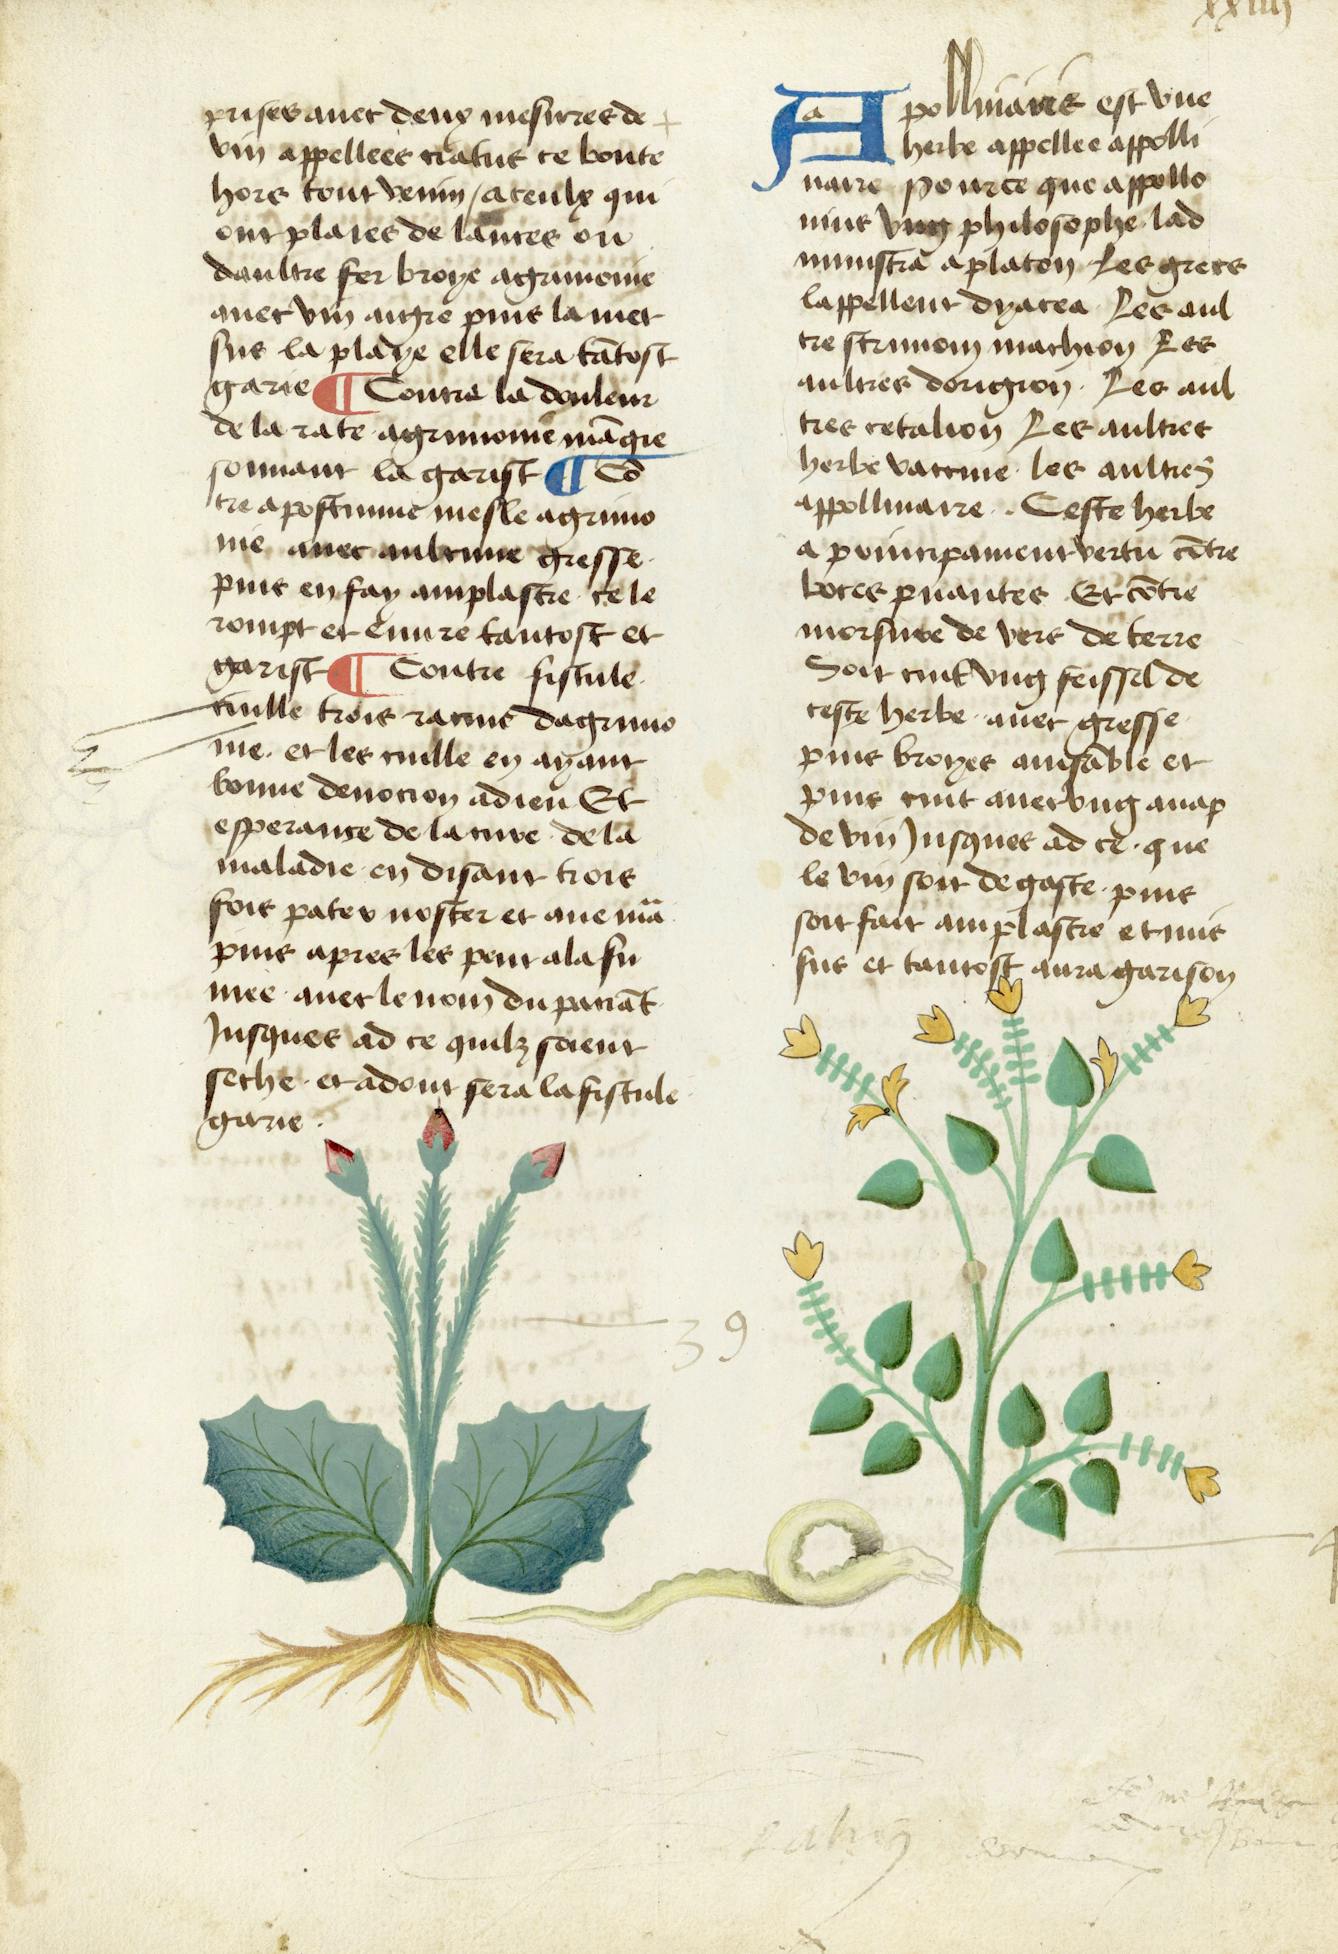 Medieval herbal entry for apolinaris